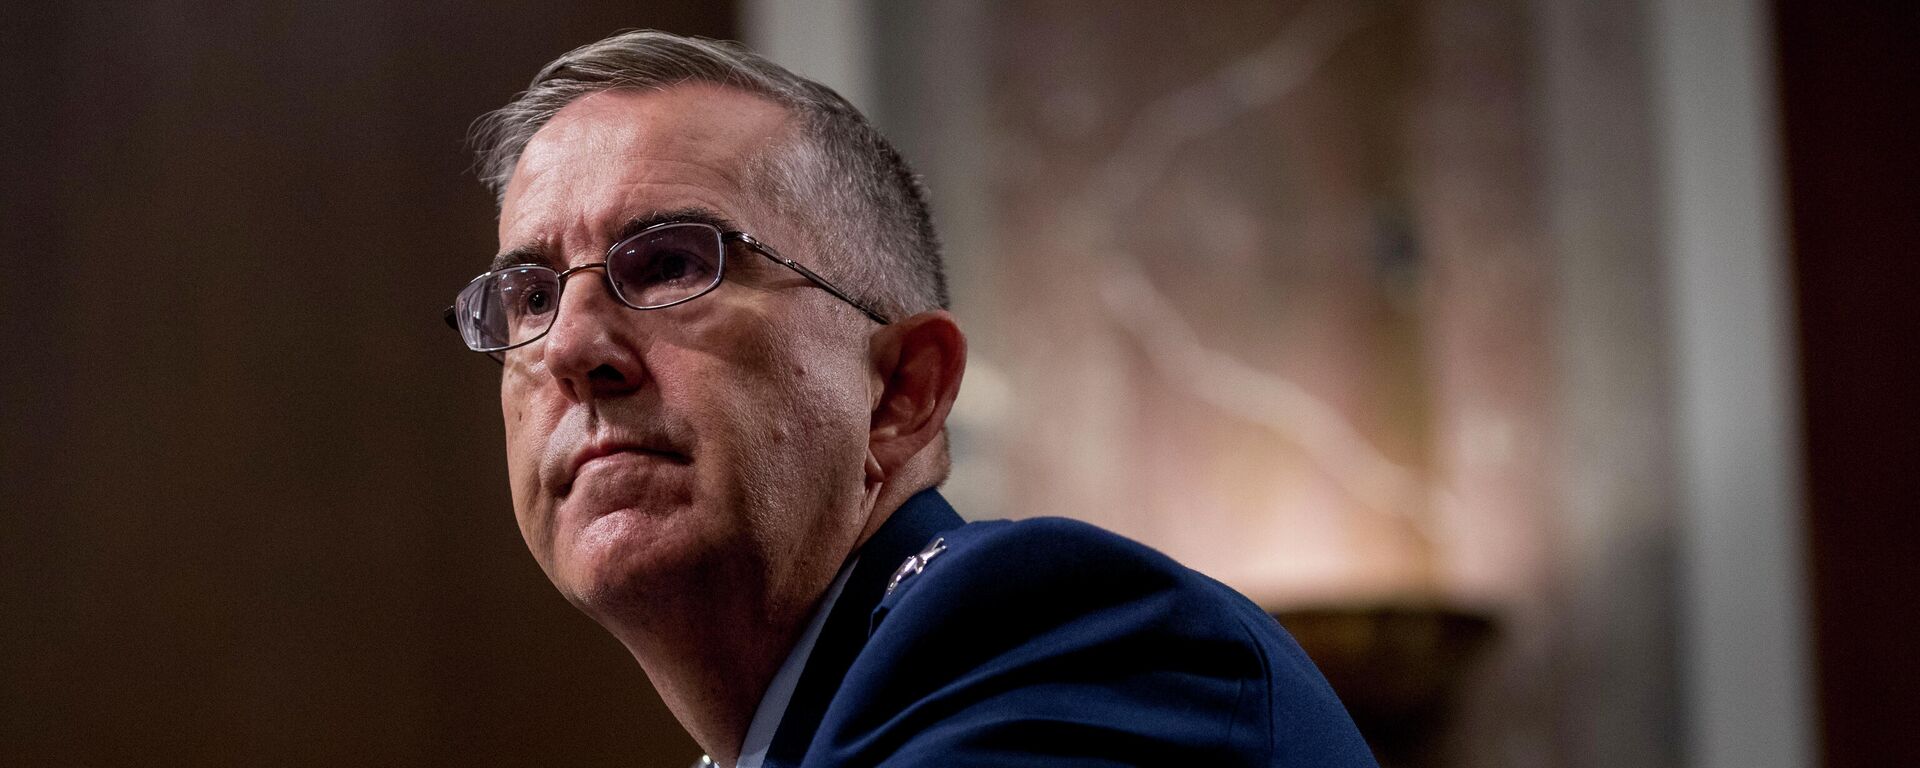 In this July 30, 2019, file photo, Air Force Gen. John Hyten appears before the Senate Armed Services Committee on Capitol Hill in Washington.  - Sputnik International, 1920, 29.10.2021